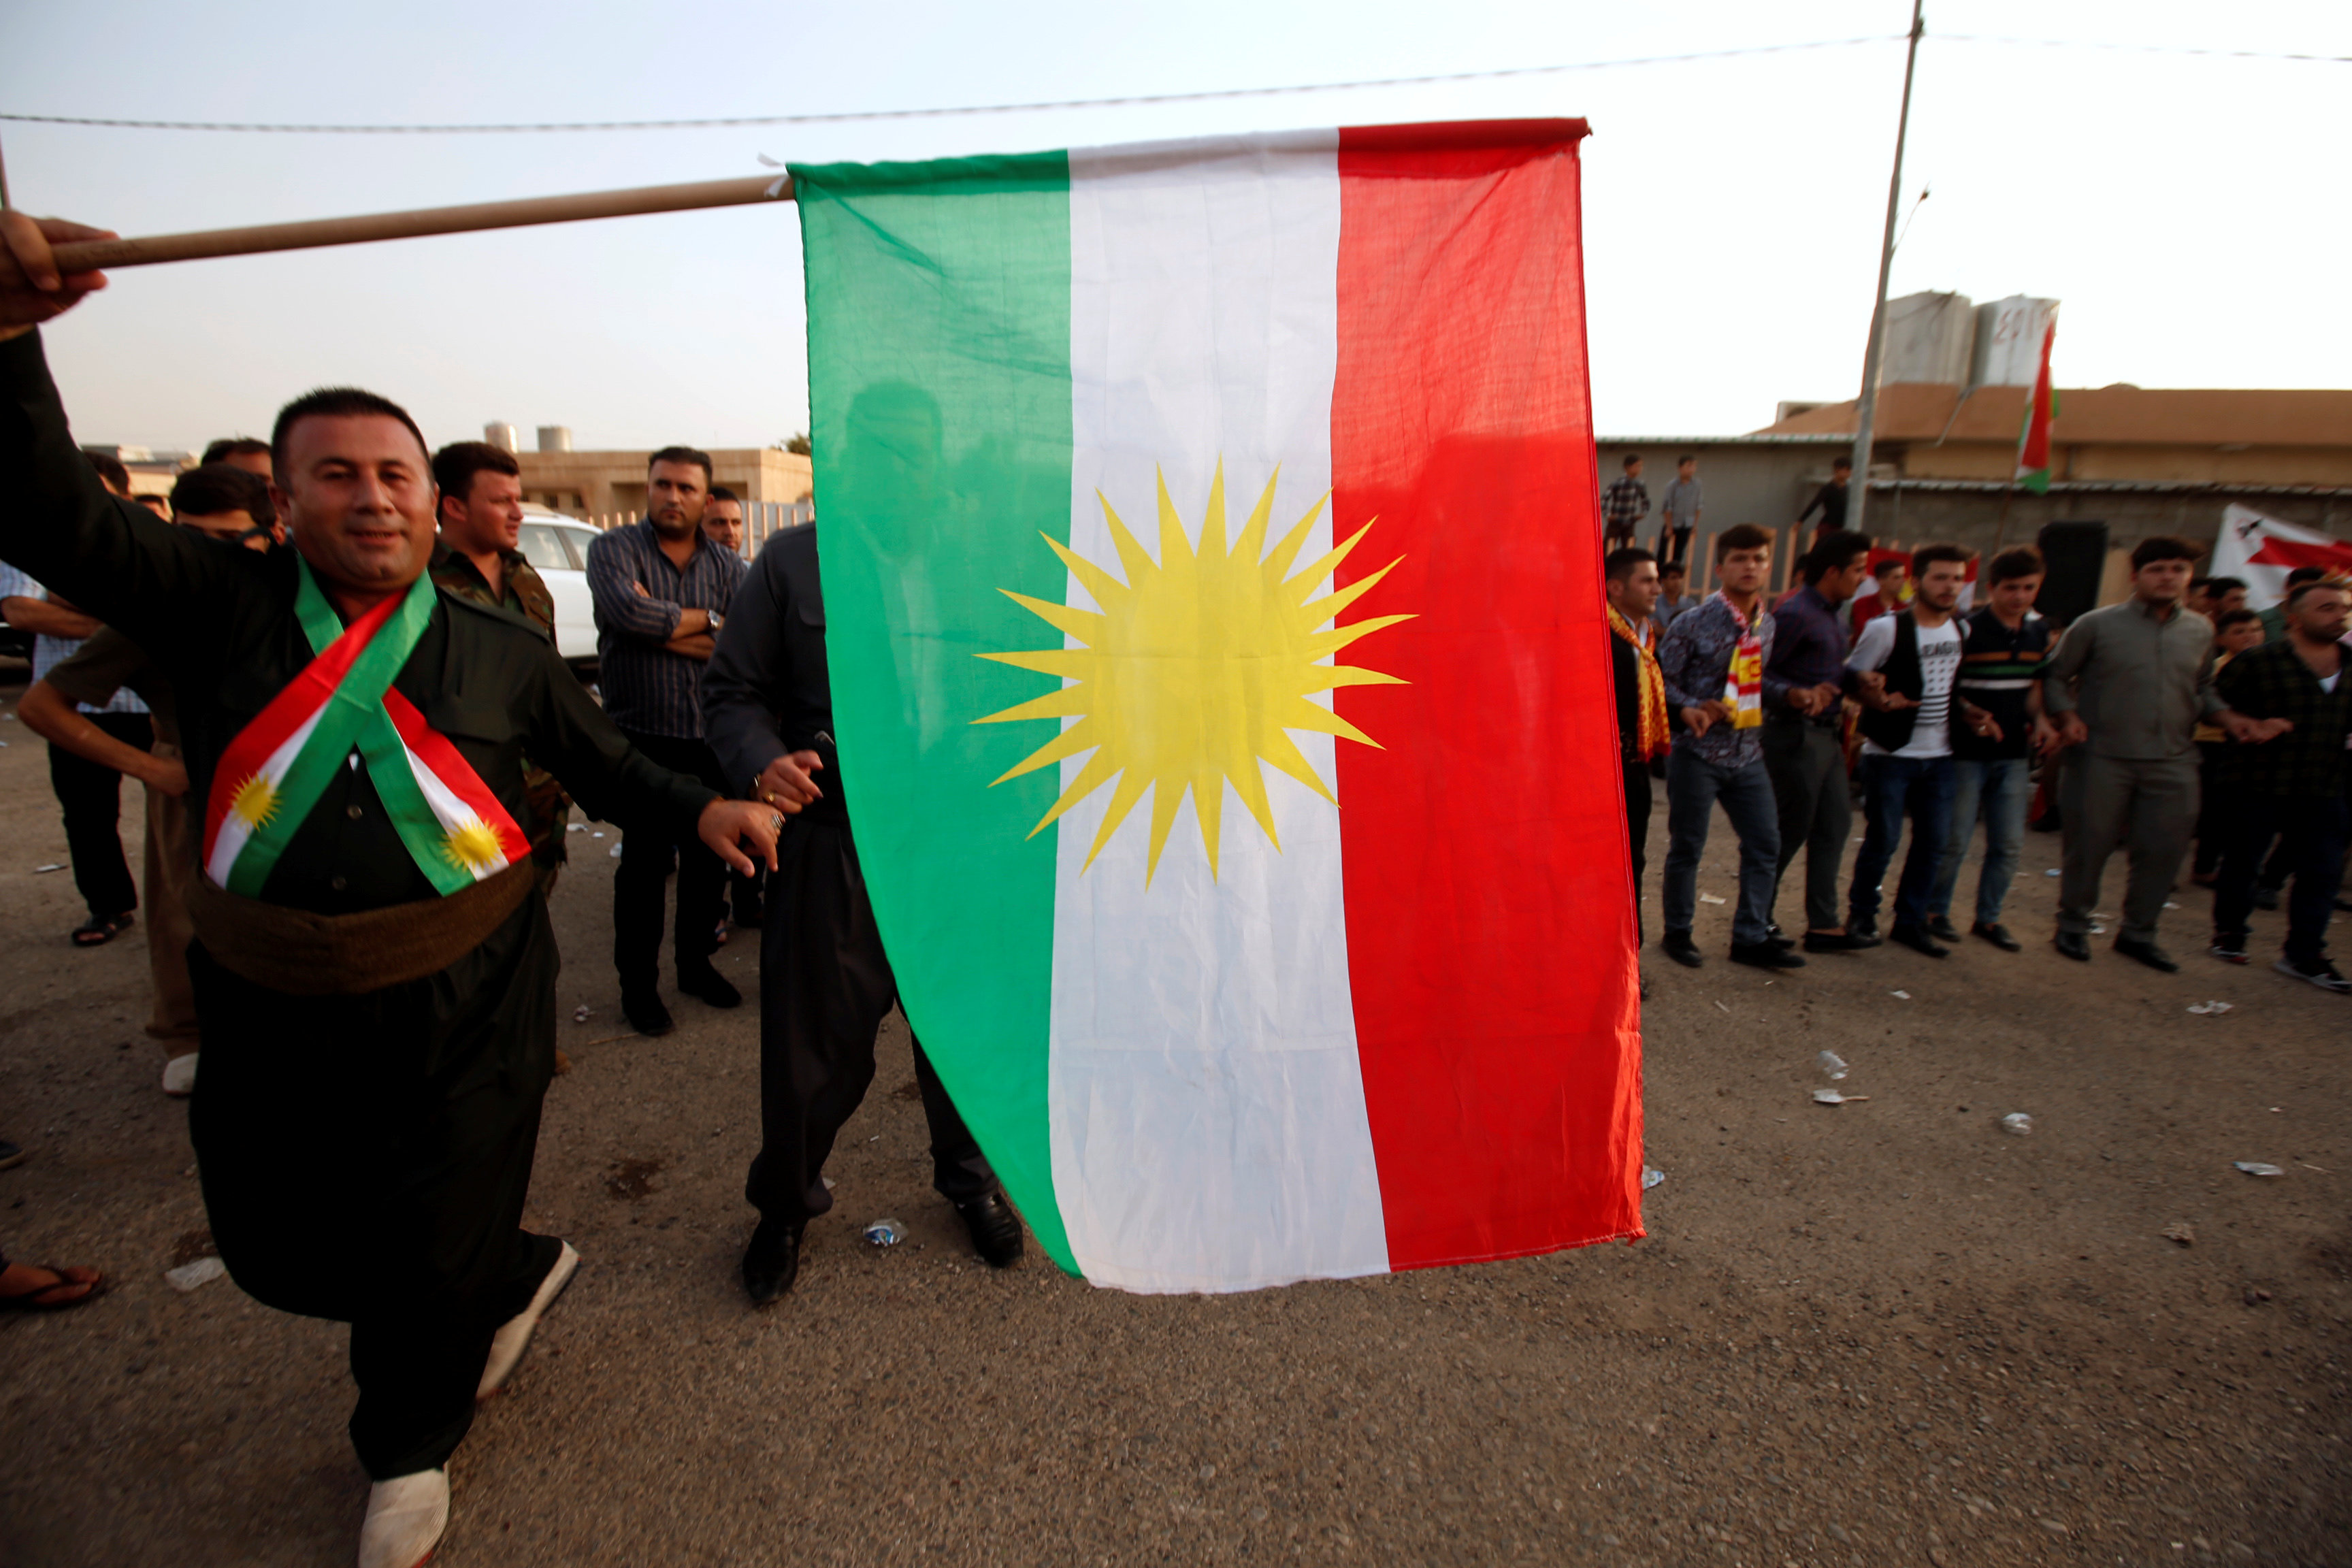 Justice for the Kurds